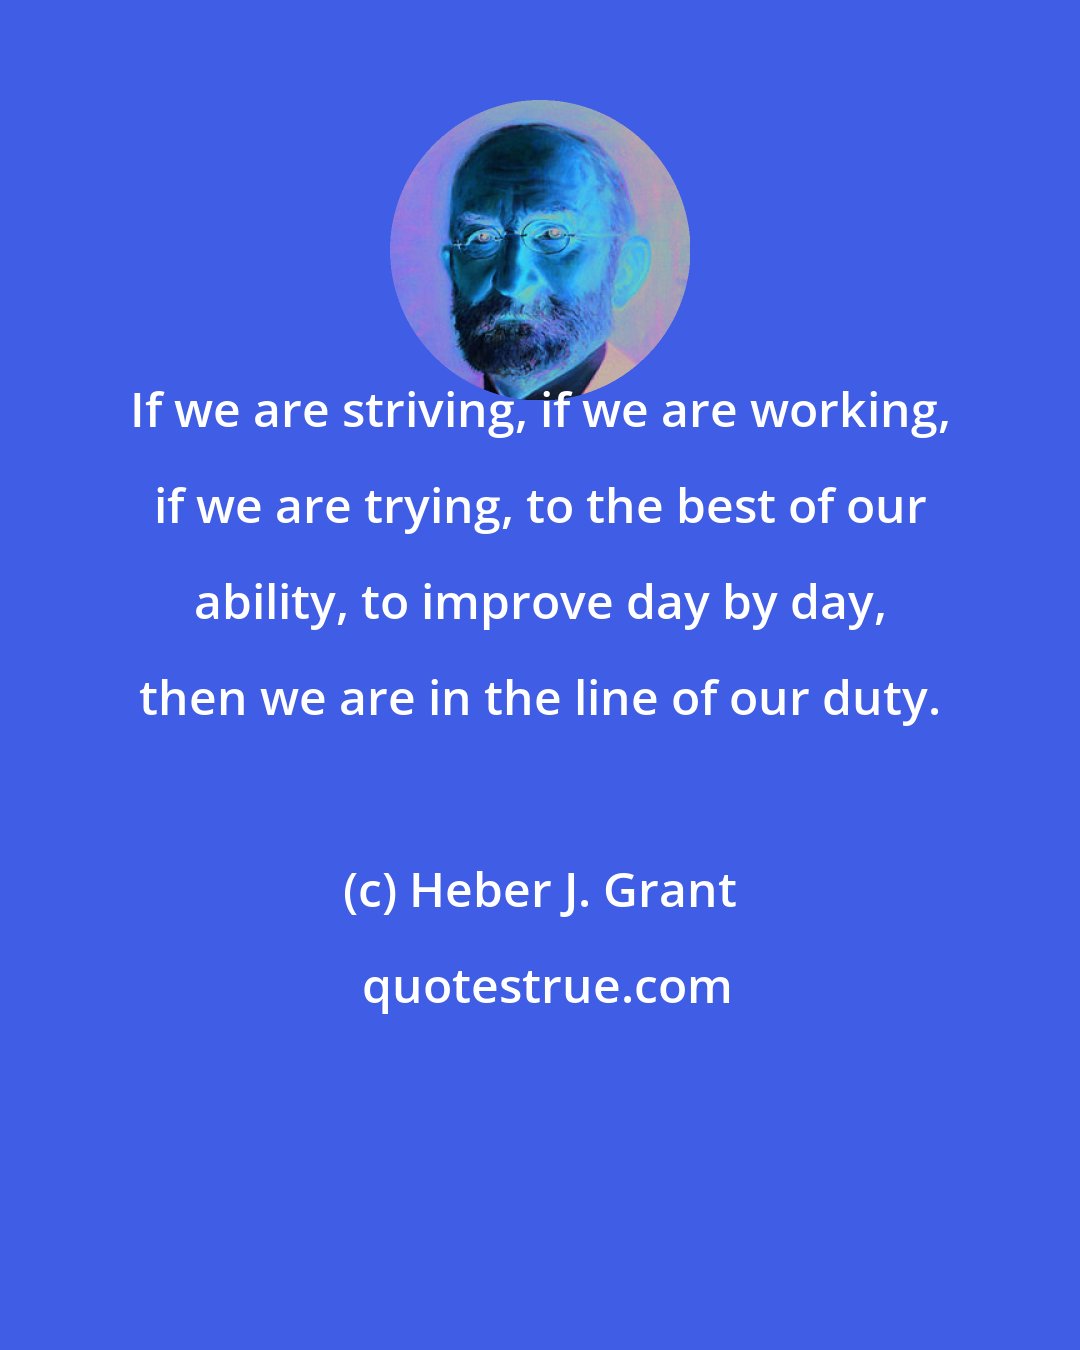 Heber J. Grant: If we are striving, if we are working, if we are trying, to the best of our ability, to improve day by day, then we are in the line of our duty.